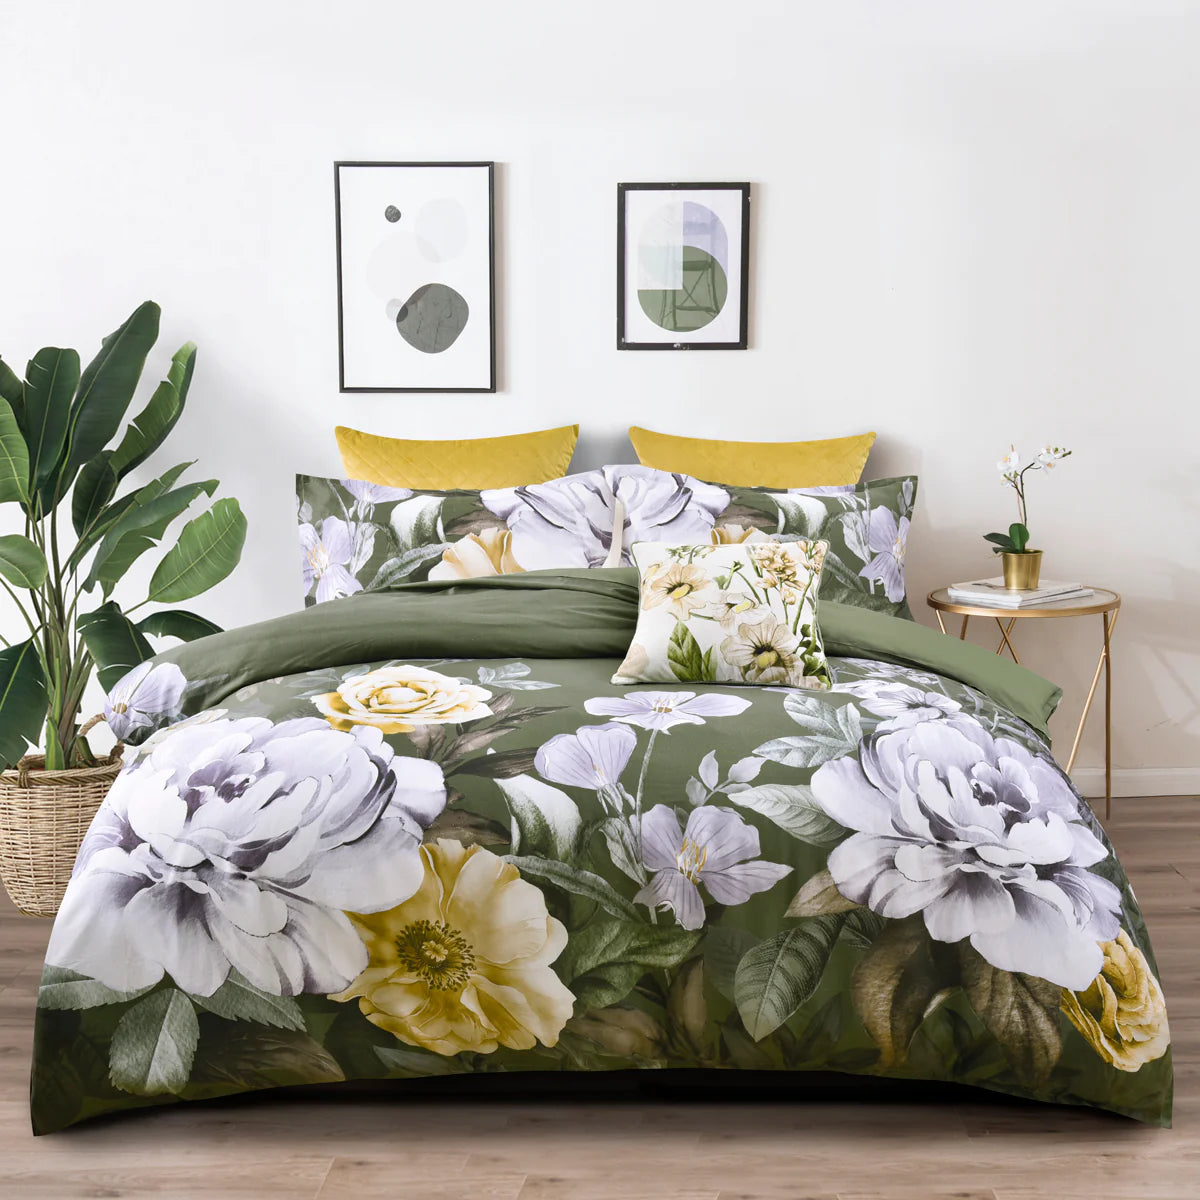 Printed on soft, cotton sateen fabric this beautiful floral design features gorgeous large roses that fill the entire quilt cover. Finished with a sophisticated tailored edge, Makayla will create a stunning statement in your bedroom.